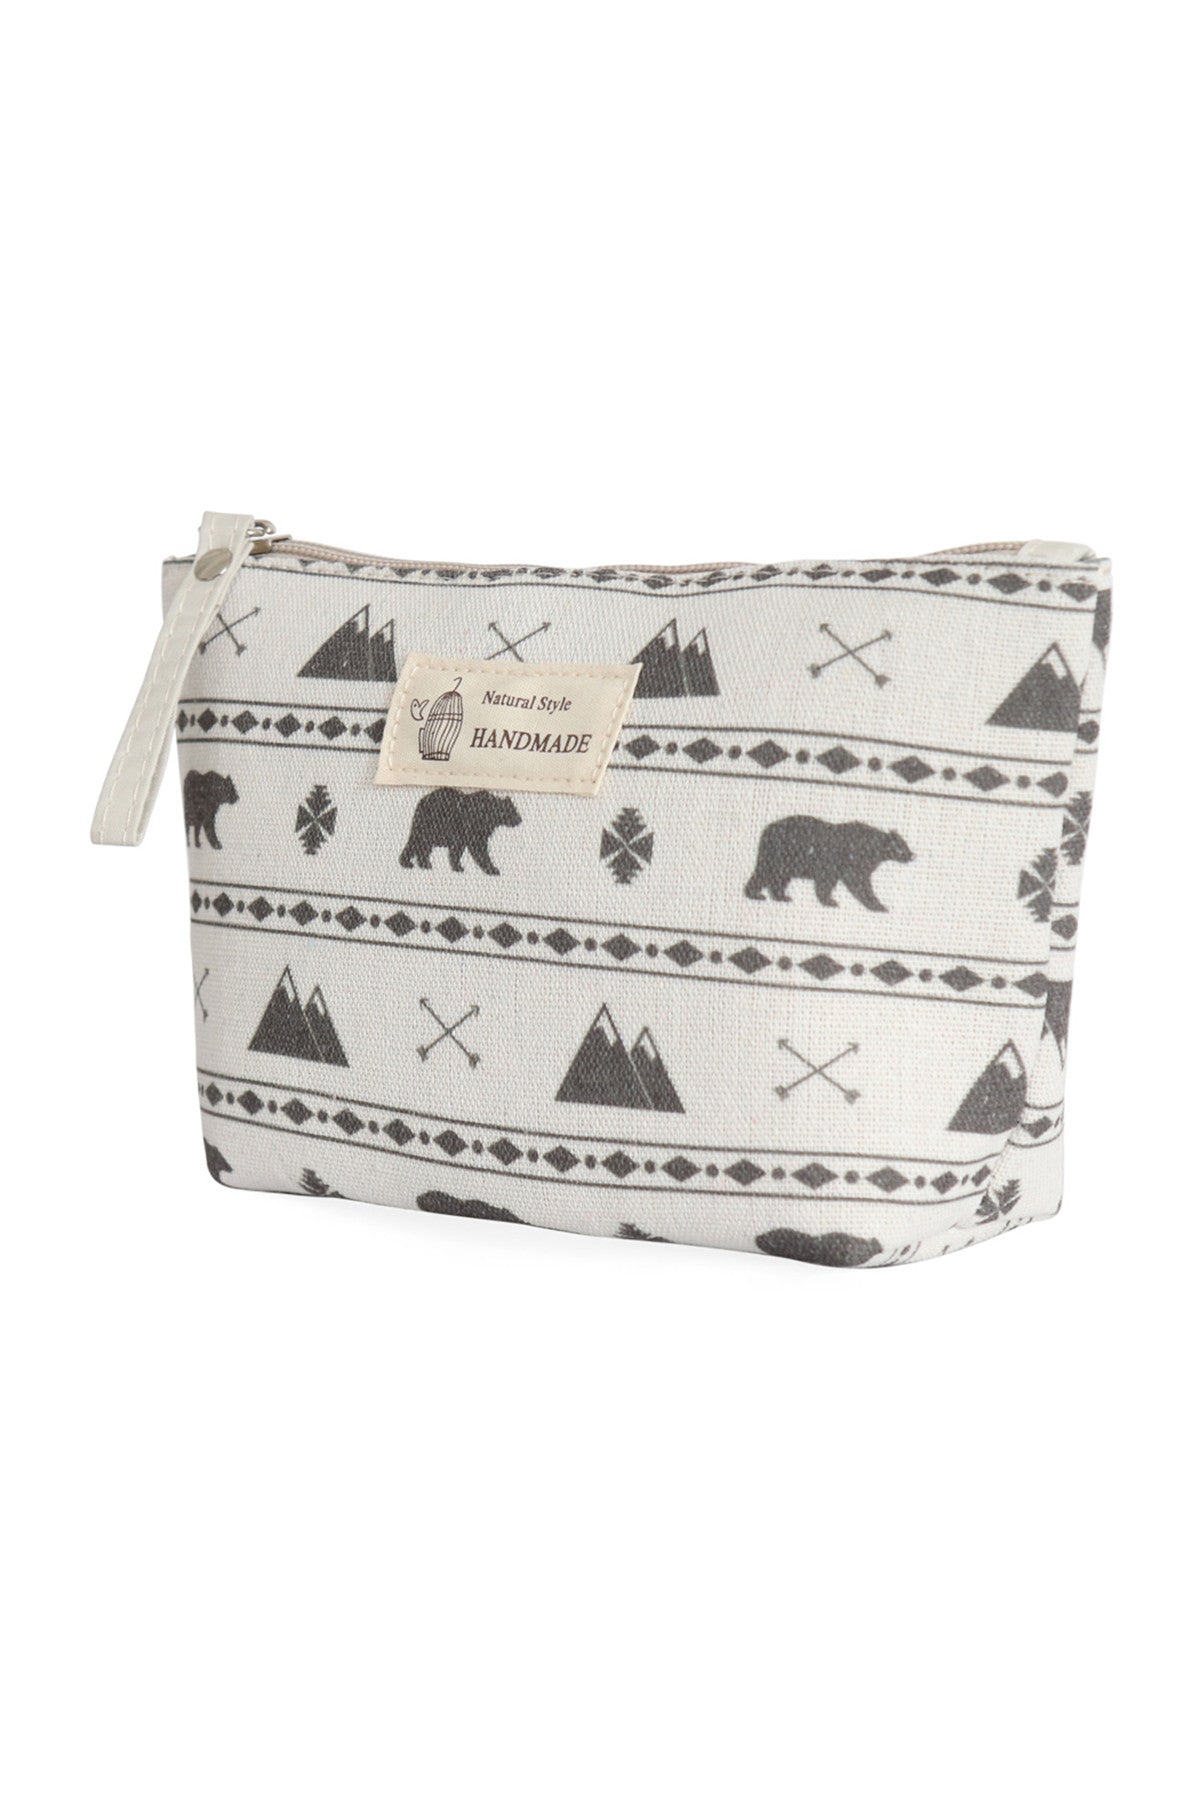 STYEL 3 BEAR PRINT COSMETIC POUCH/6PCS (NOW $1.50 ONLY!)